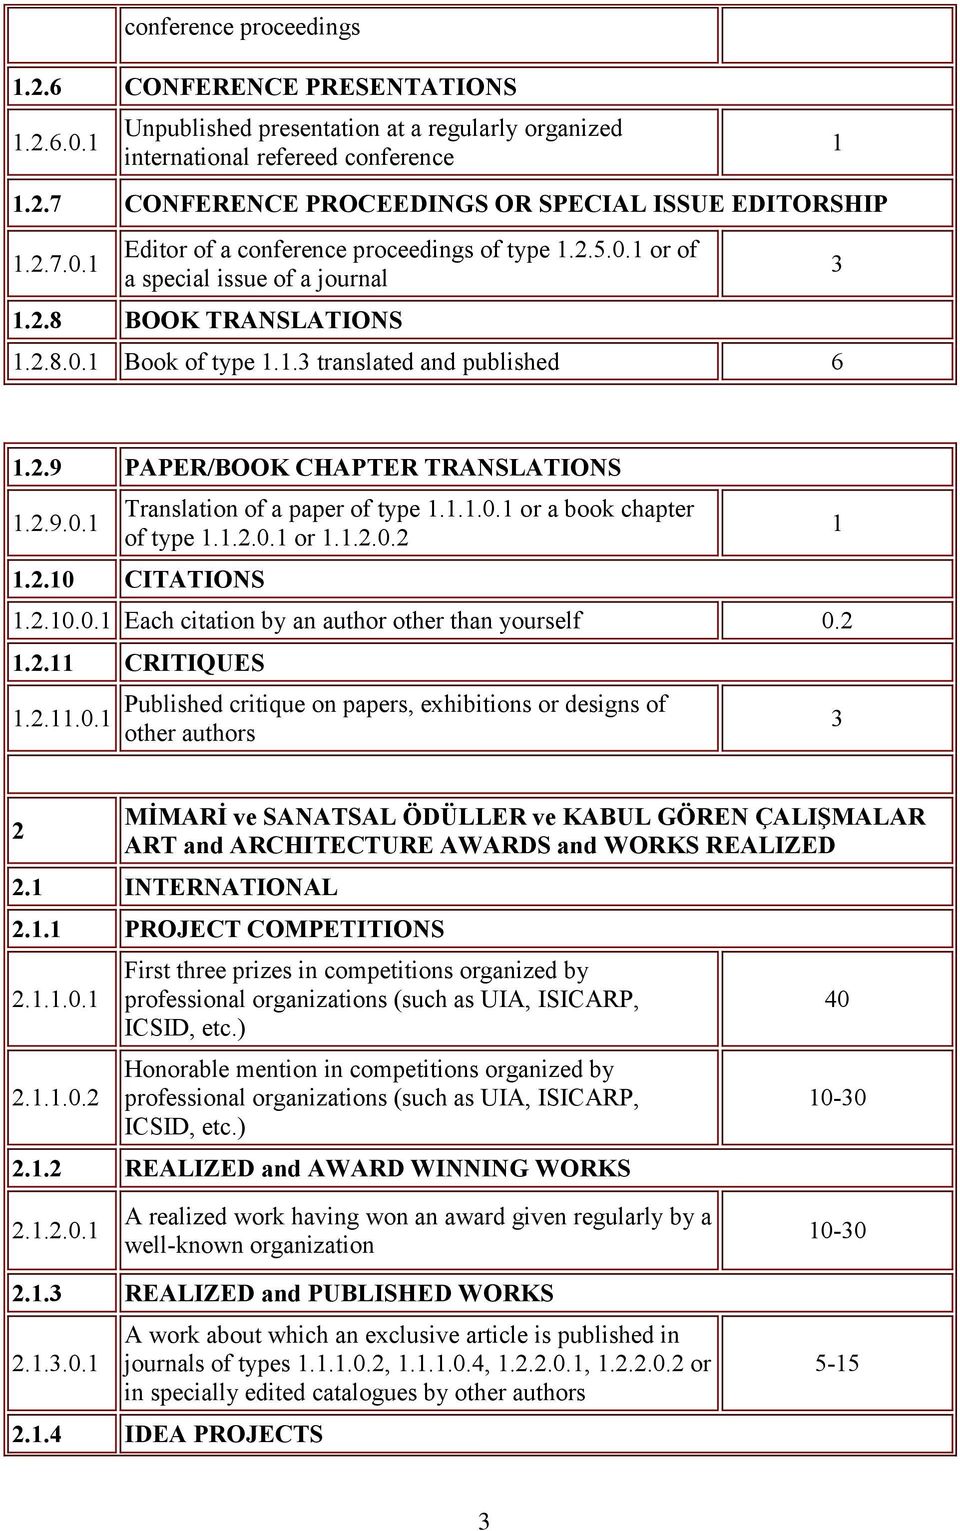 2.9.0.1 Translation of a paper of type 1.1.1.0.1 or a book chapter of type 1.1.2.0.1 or 1.1.2.0.2 1.2. CITATIONS 1.2..0.1 Each citation by an author other than yourself 0.2 1.2.11 CRITIQUES 1.2.11.0.1 Published critique on papers, exhibitions or designs of other authors 1 2 MİMARİ ve SANATSAL ÖDÜLLER ve KABUL GÖREN ÇALIŞMALAR ART and ARCHITECTURE AWARDS and WORKS REALIZED 2.